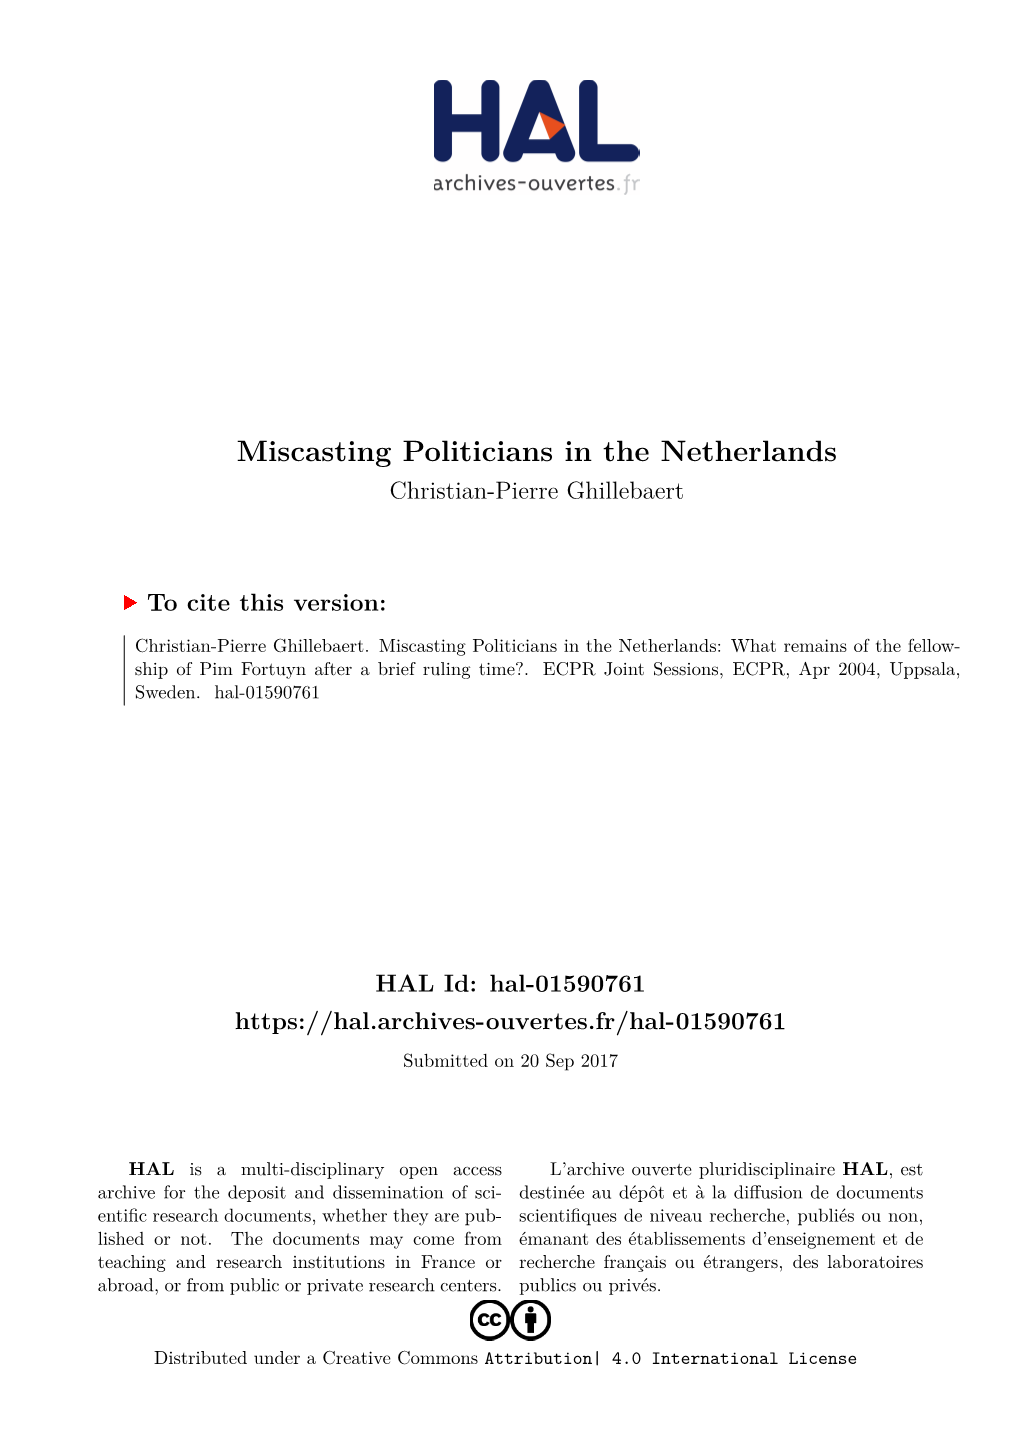 Miscasting Politicians in the Netherlands Christian-Pierre Ghillebaert